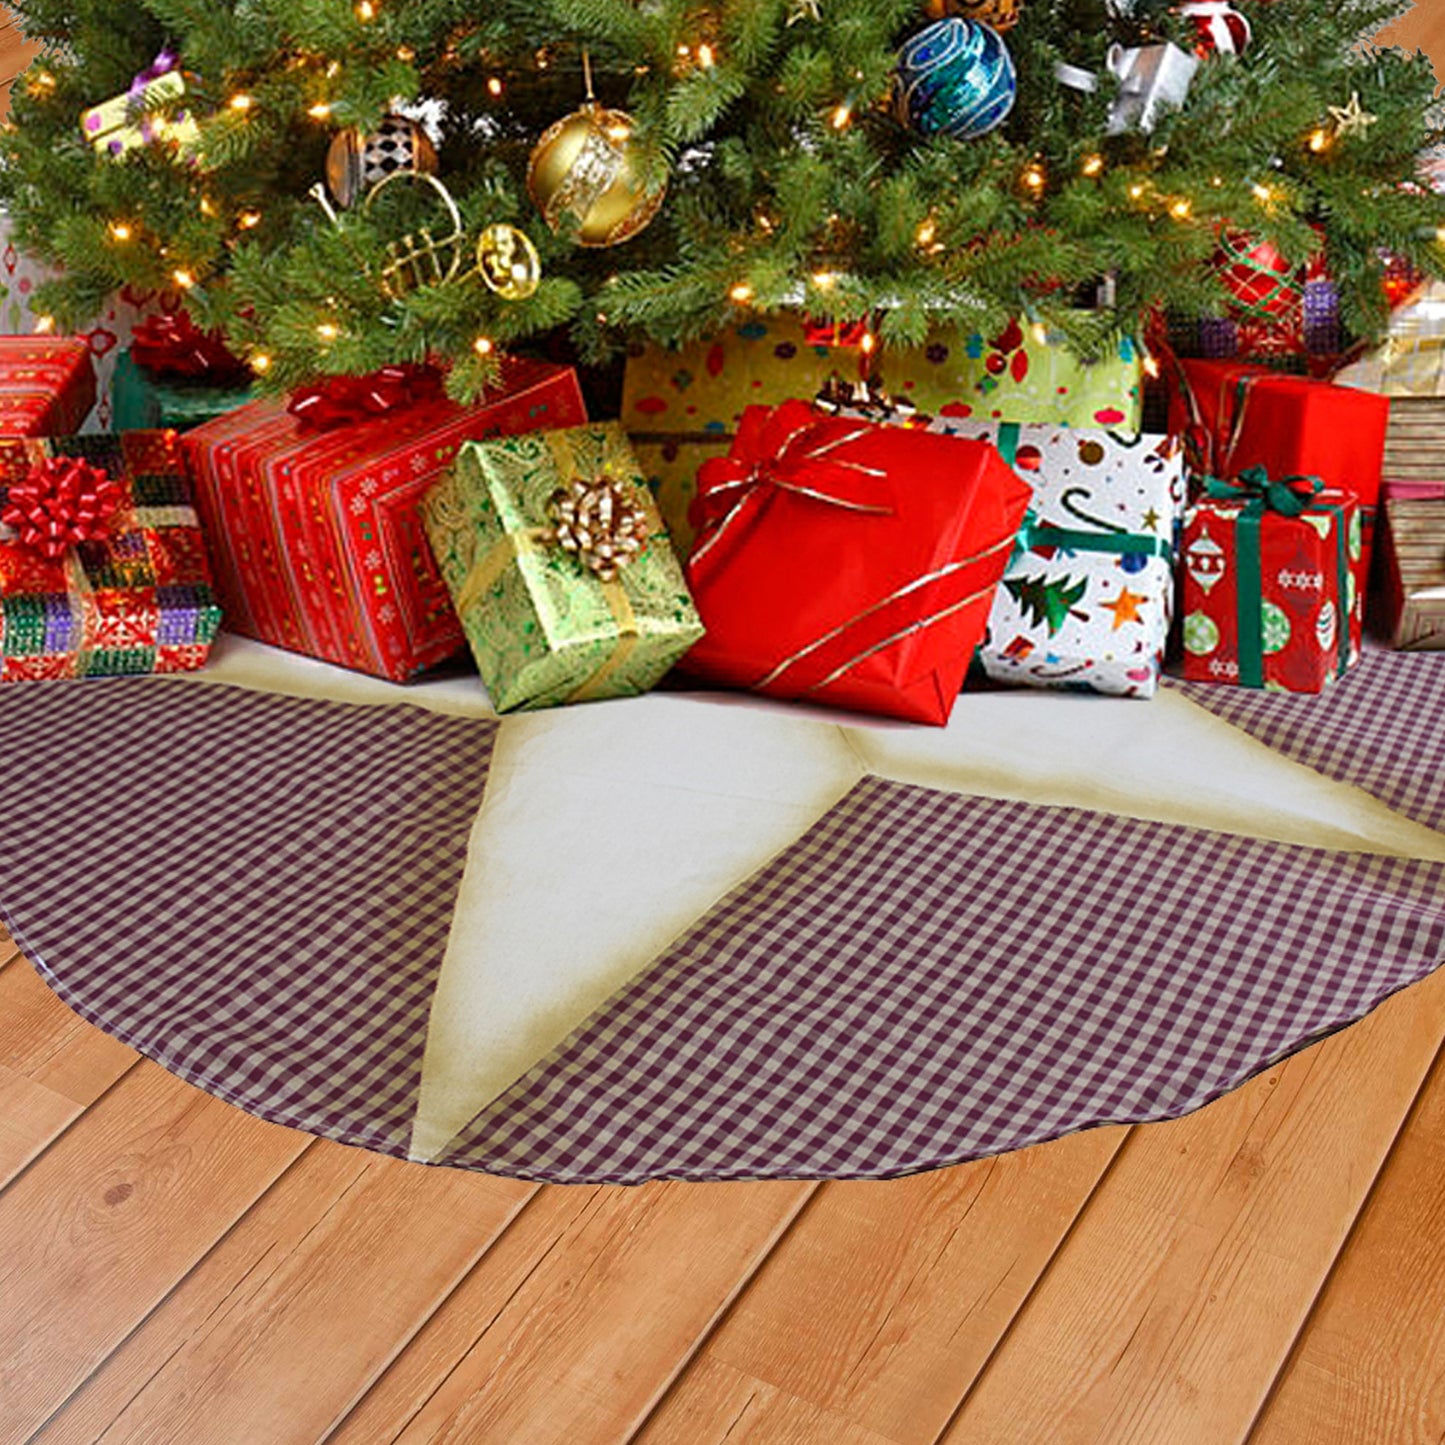 CVHOMEDECO. Primitive Rustic 50 Inch Christmas Tree Skirt Double Layers Burgundy Plaid Stitching Large Burlap Star for Christmas Holiday Party Décor.